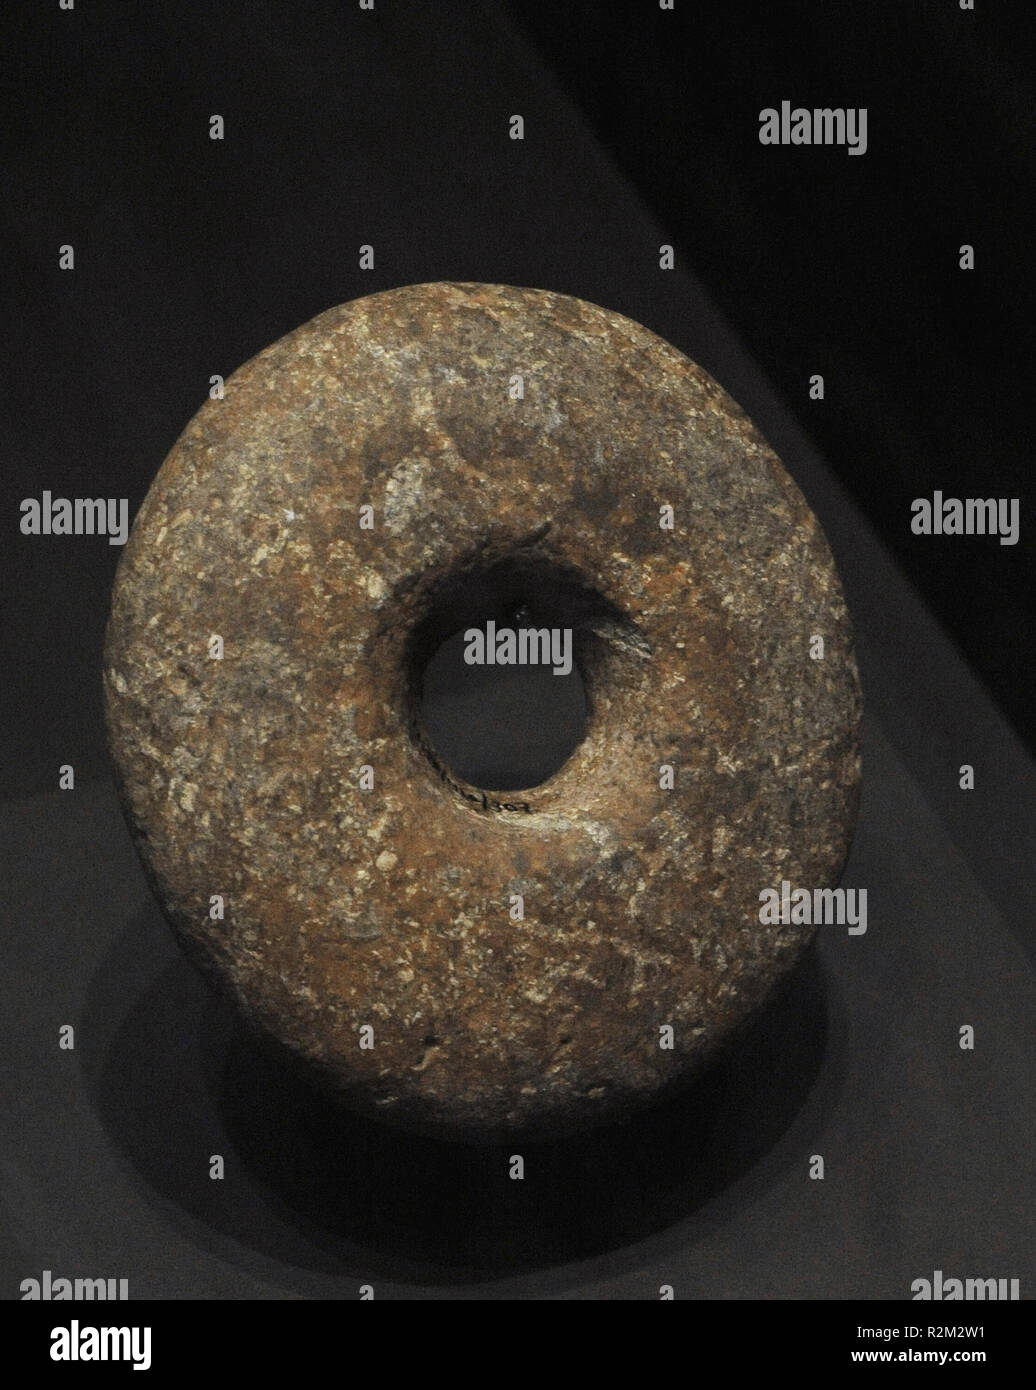 Neolithic. Stone weight from a digging stick. Limestone. From El Higueron Cave (Rincon de la Victoria, Malaga province, Andalusia, Spain). National Archaeological Museum. Madrid. Spain. Stock Photo